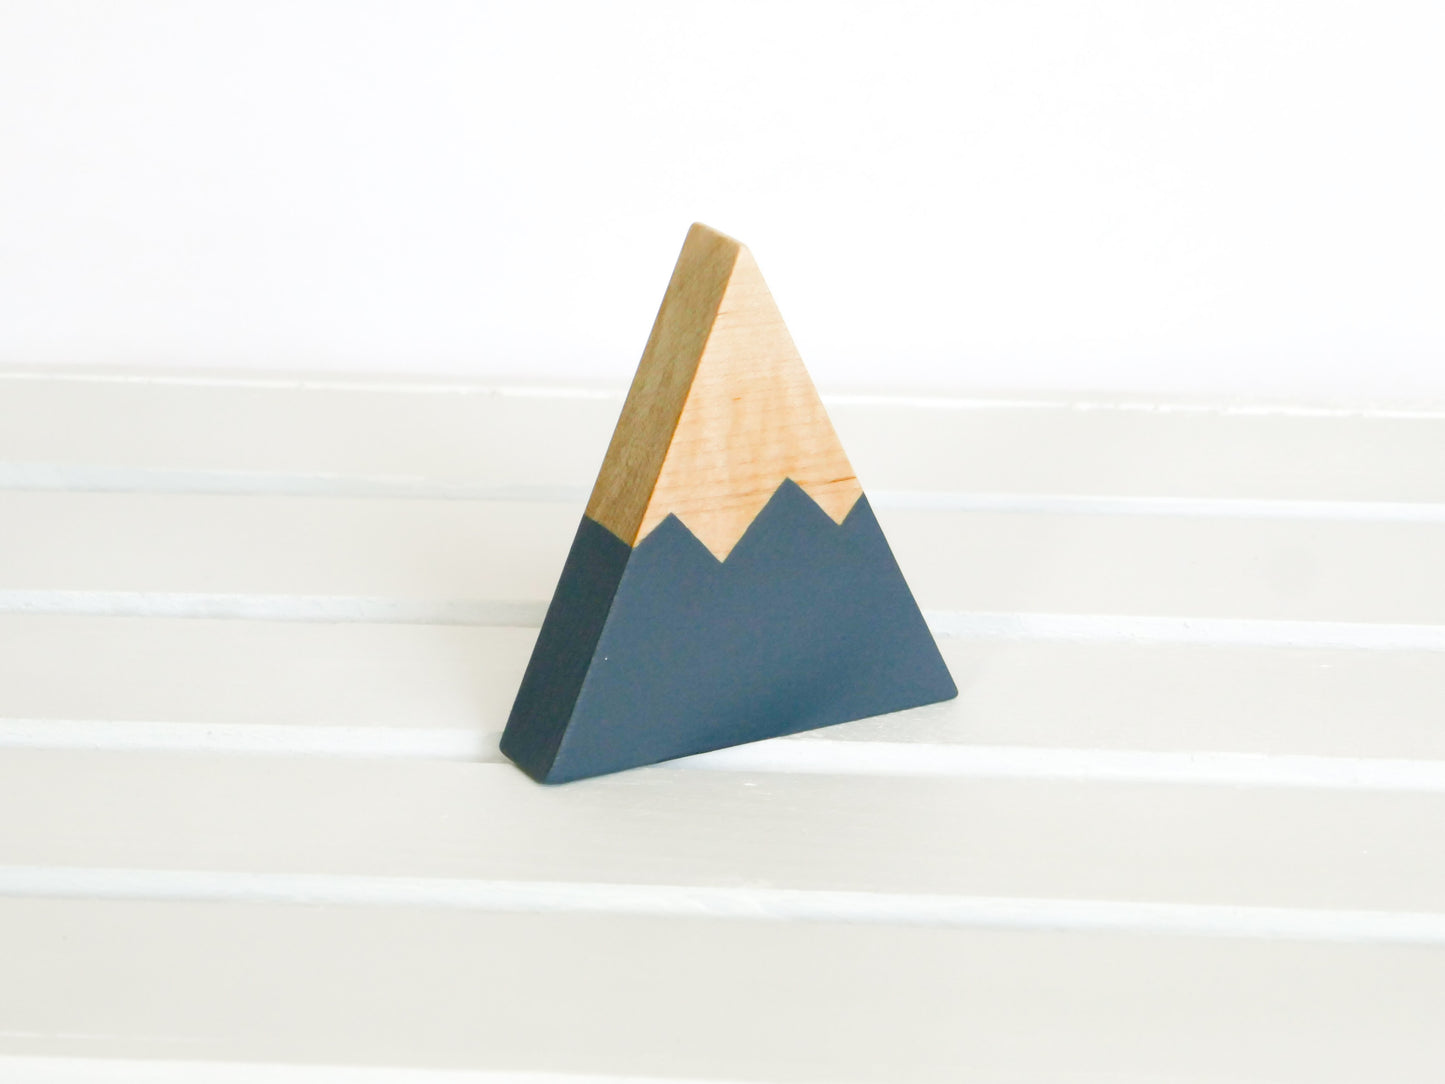 Wooden Mountain - Charcoal Gray